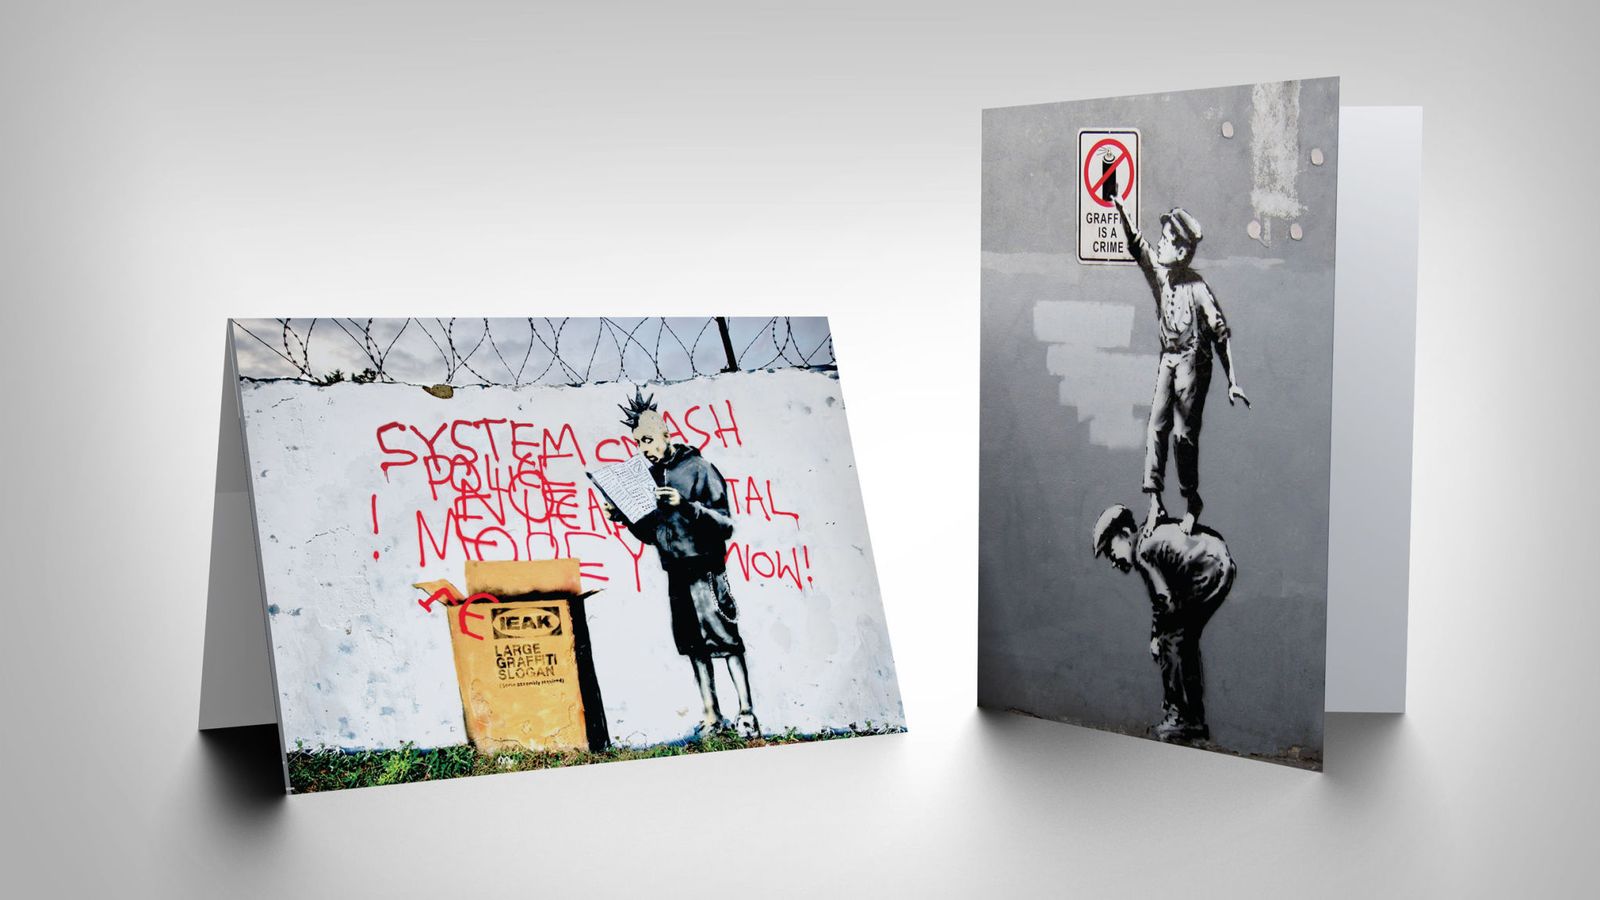 Full Colour Back Has Made Cards Using Images Of Banksy - Full Color Black Banksy - HD Wallpaper 